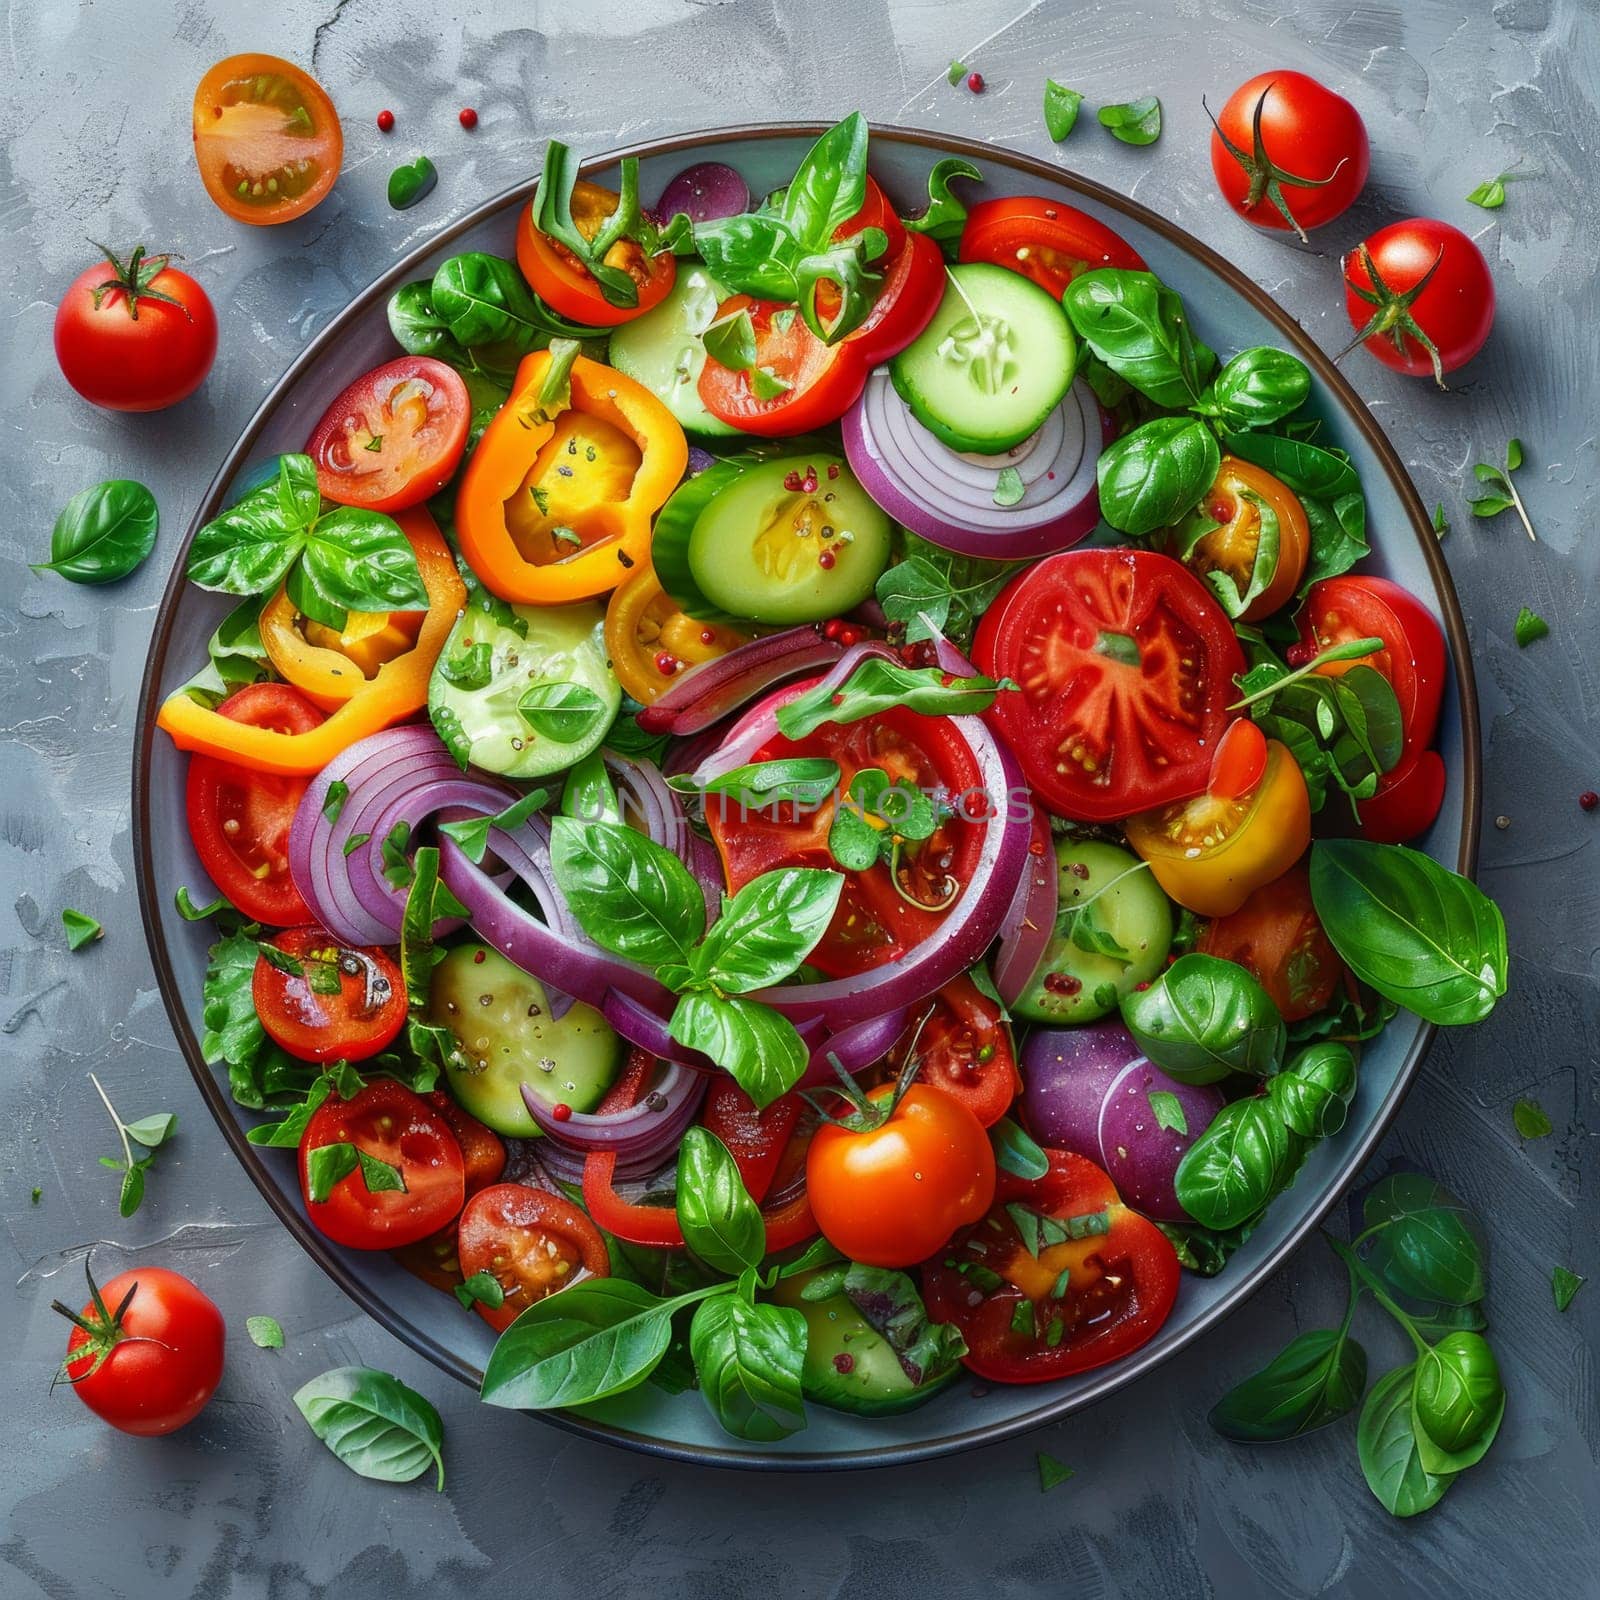 Top view of a bowl of salad with tomatoes, cucumbers, and onions in a grey rustic background.